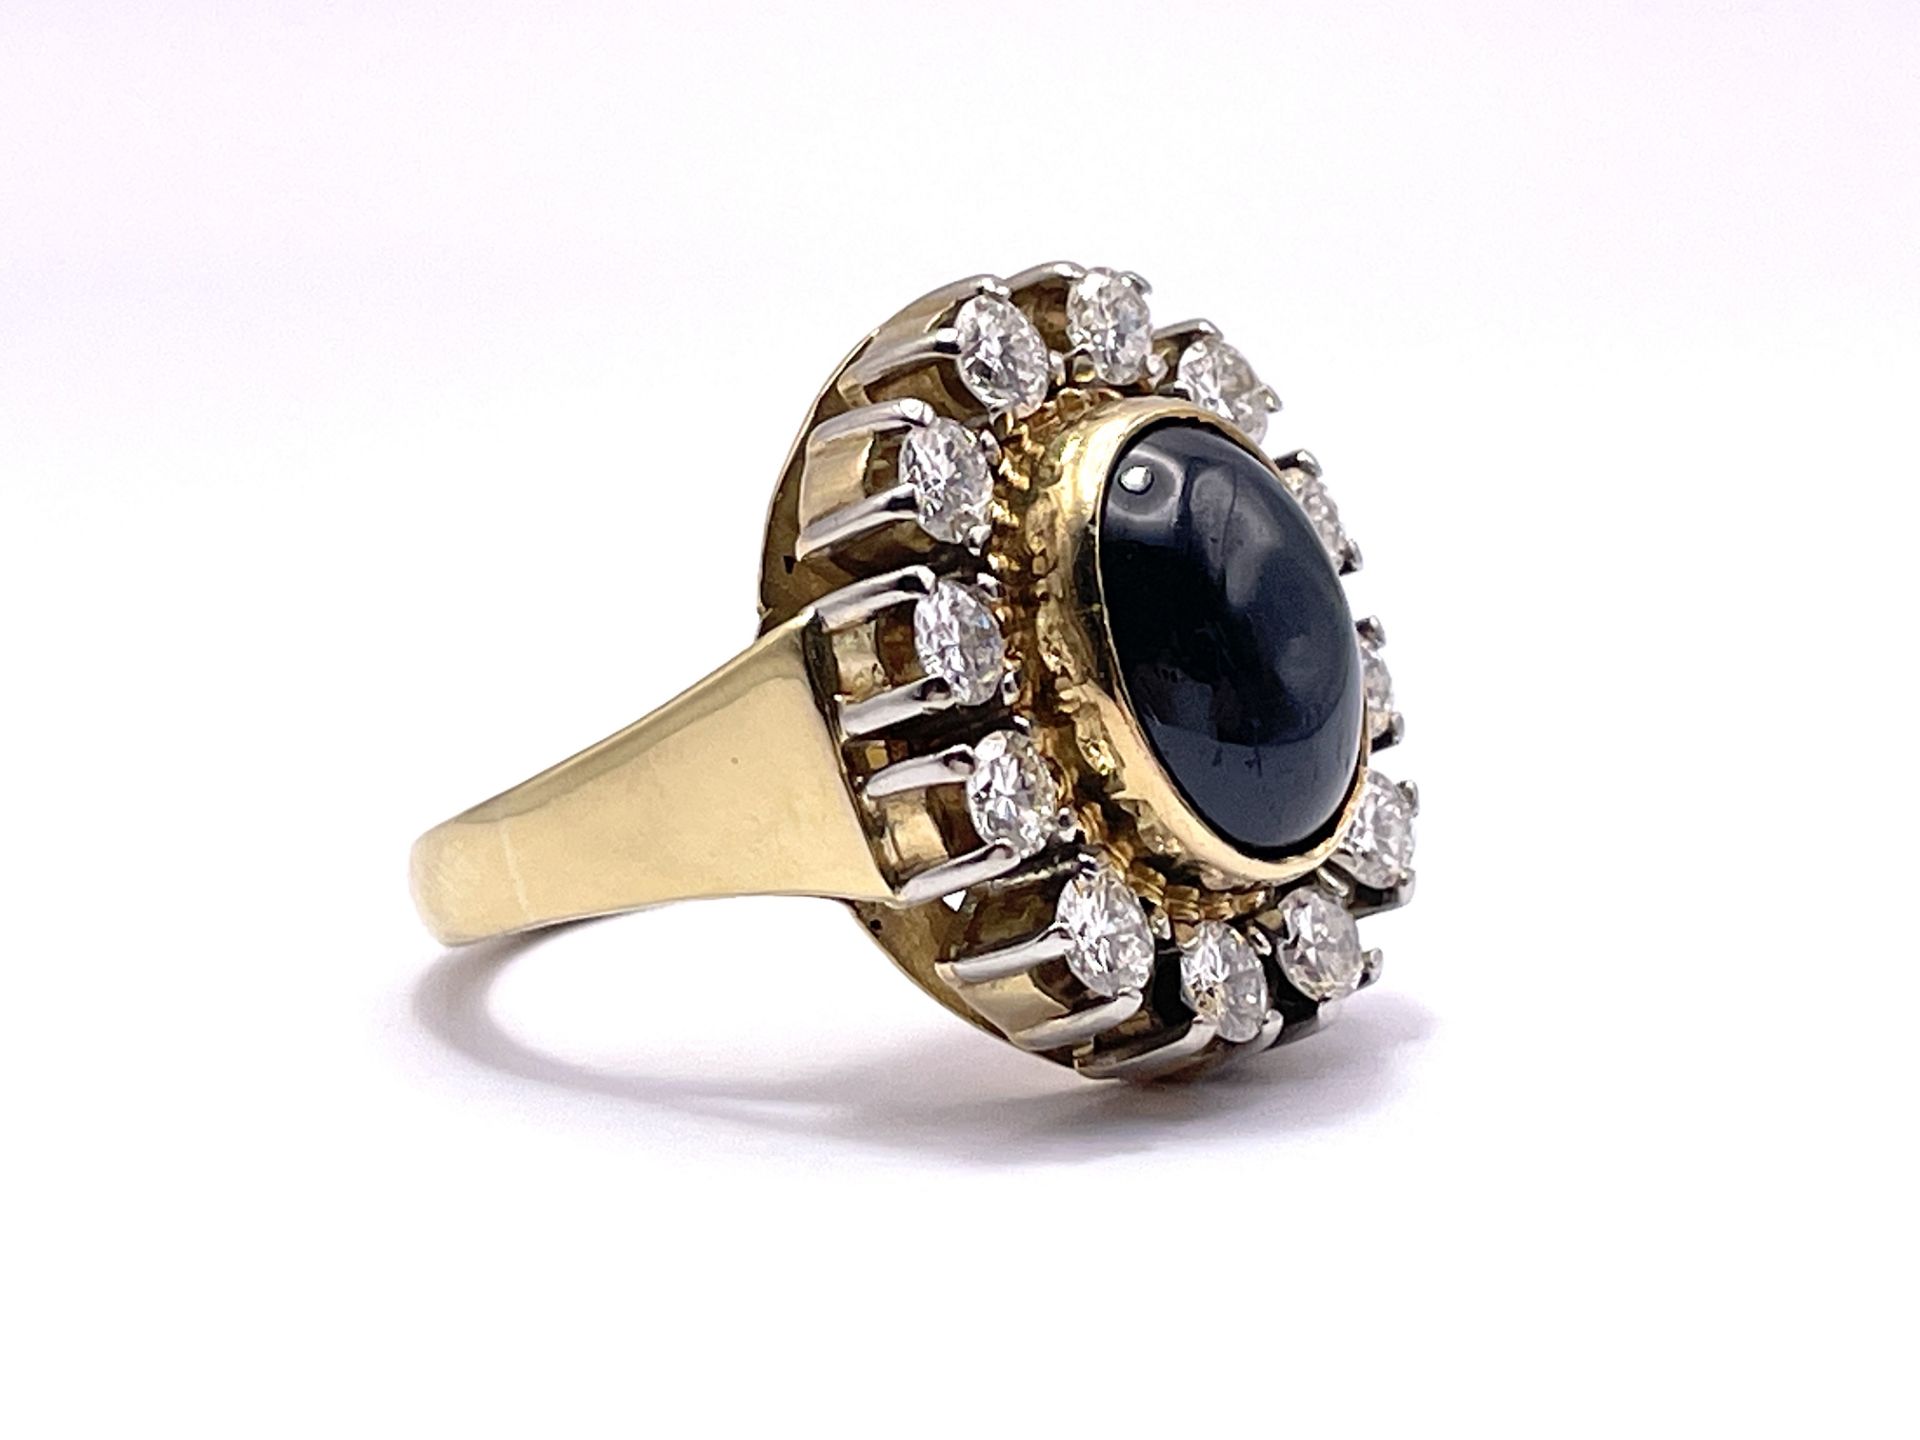 Sapphire ring with brilliants - Image 2 of 6